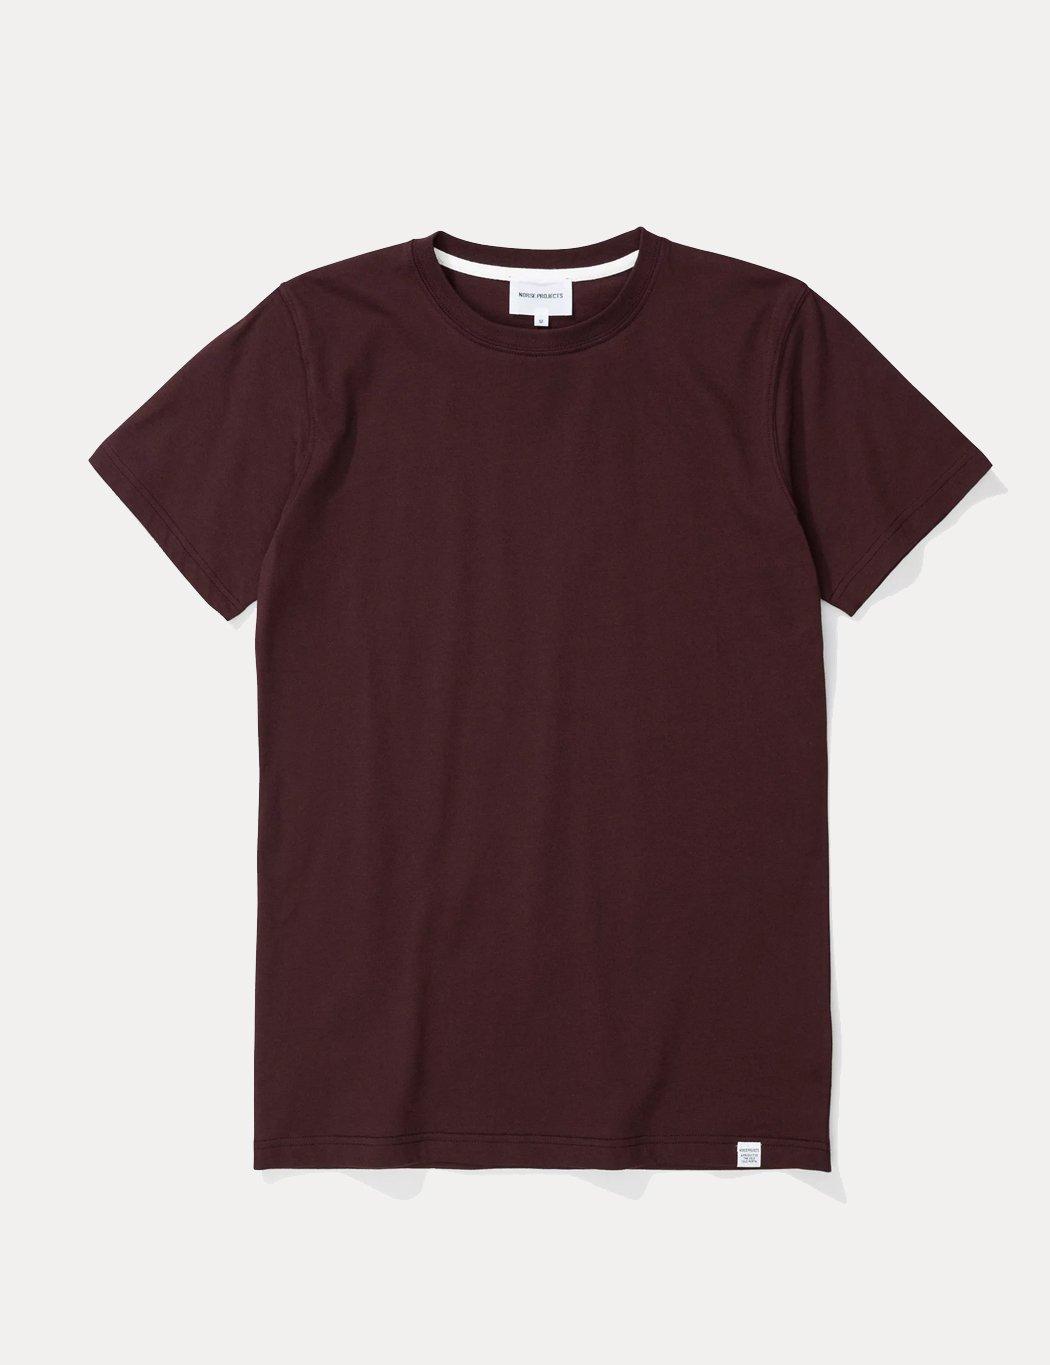 Norse Projects Cotton Niels Standard T-shirt in Brown for Men - Lyst